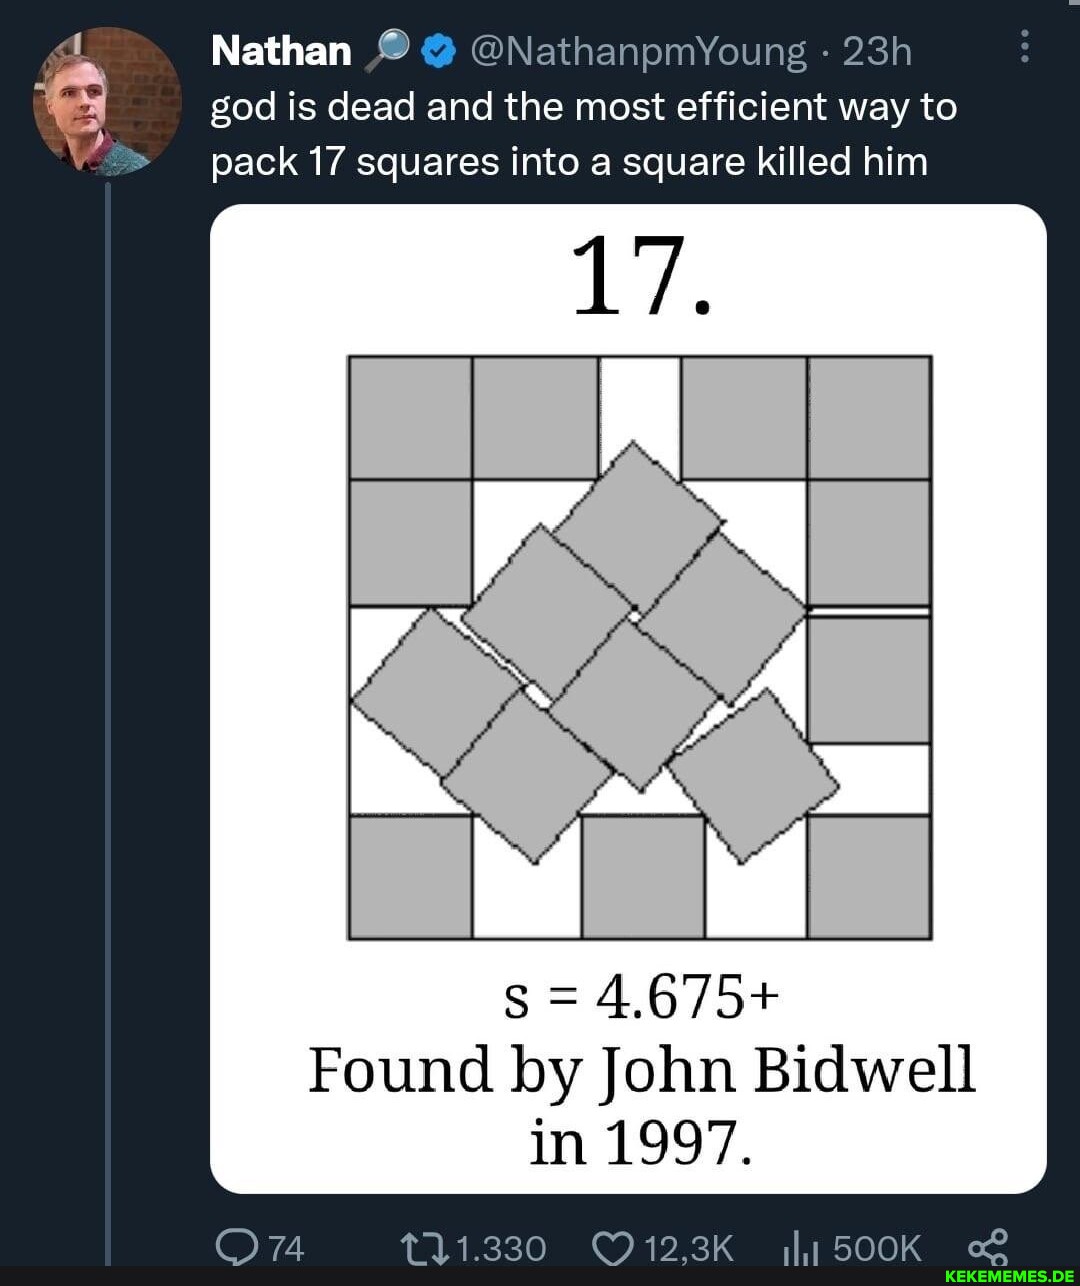 Nathan god is dead and the most efficient way to pack 17 squares into a square k